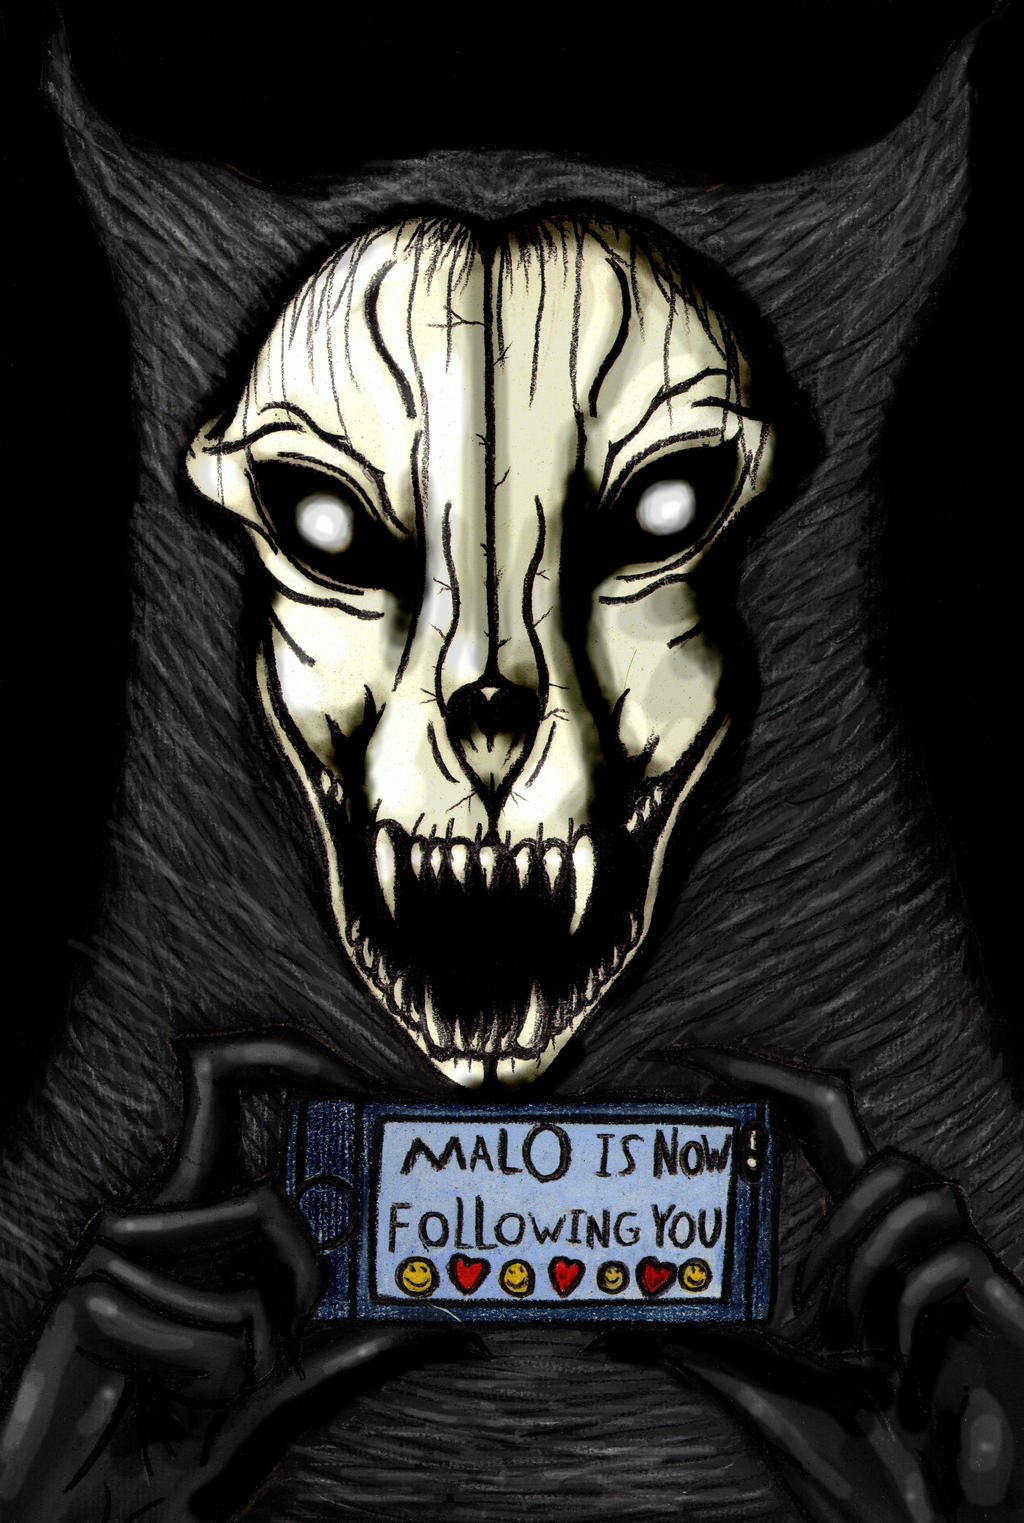 SCP-1471 MalO ver1.0.0 by charcoalman on DeviantArt